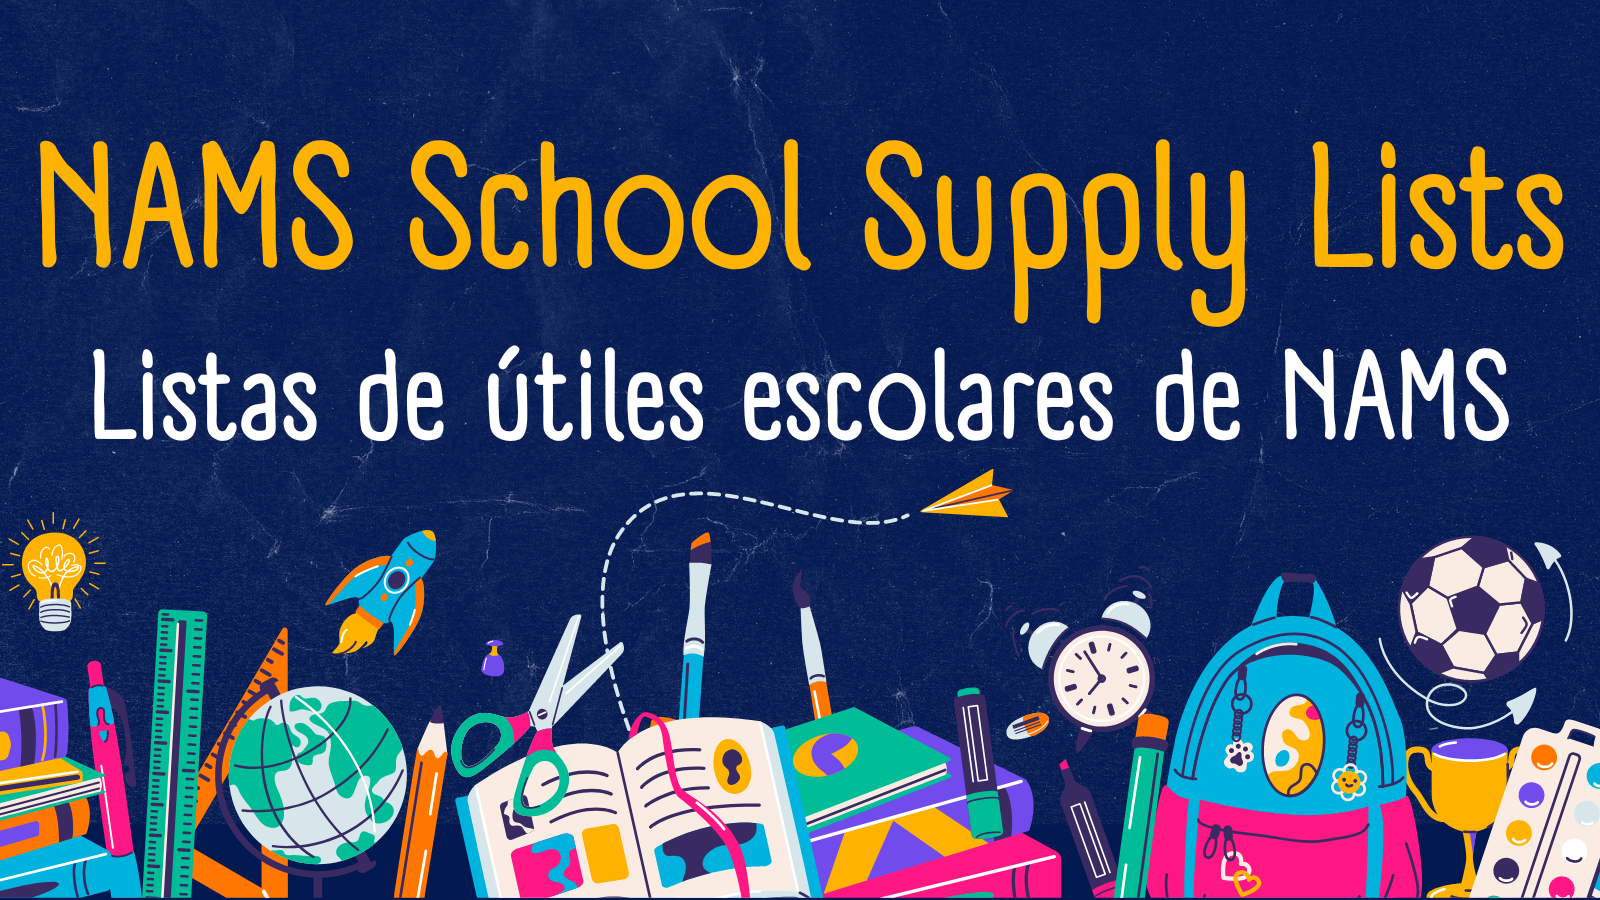 Graphic with navy background with drawings of a glode, rulers, books, a backpack, and other school supplies. Image reads: NAMS School Supply Lists, Listas de utiles escolares de NAMS